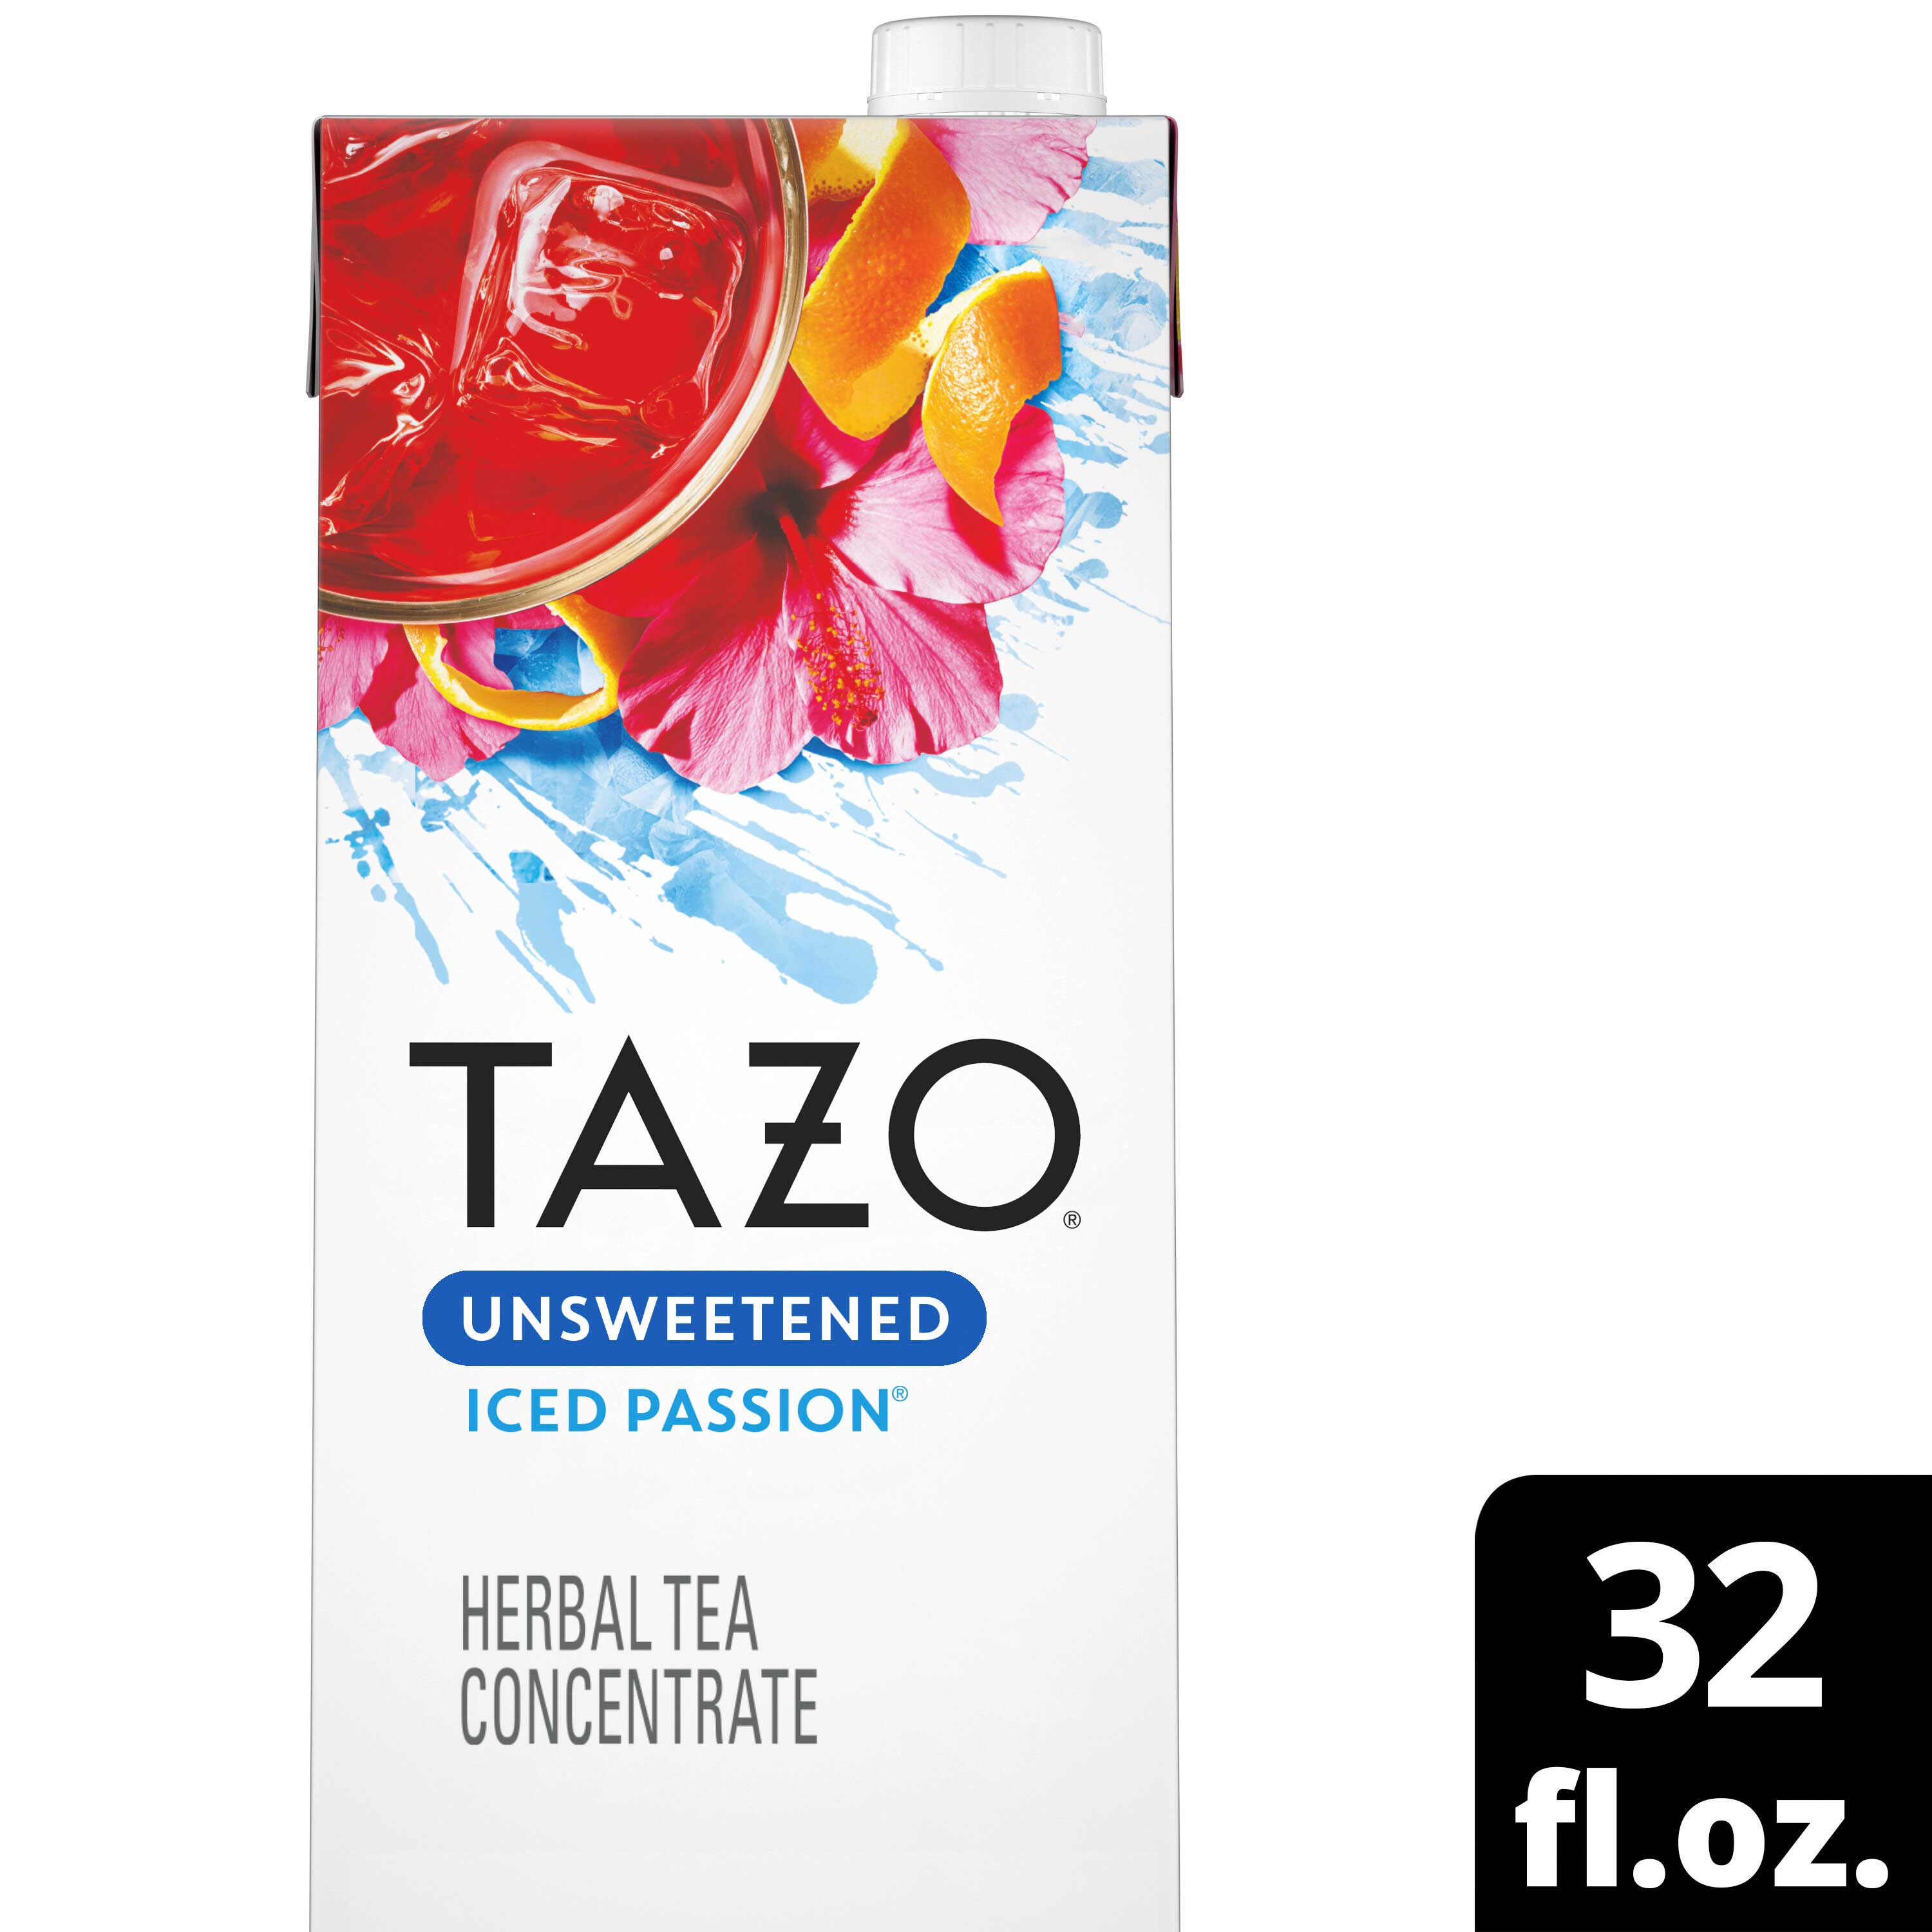 Tazo Passion Unsweetened Iced Herbal Tea Concentrate, 32 Ounce -- 6 per case